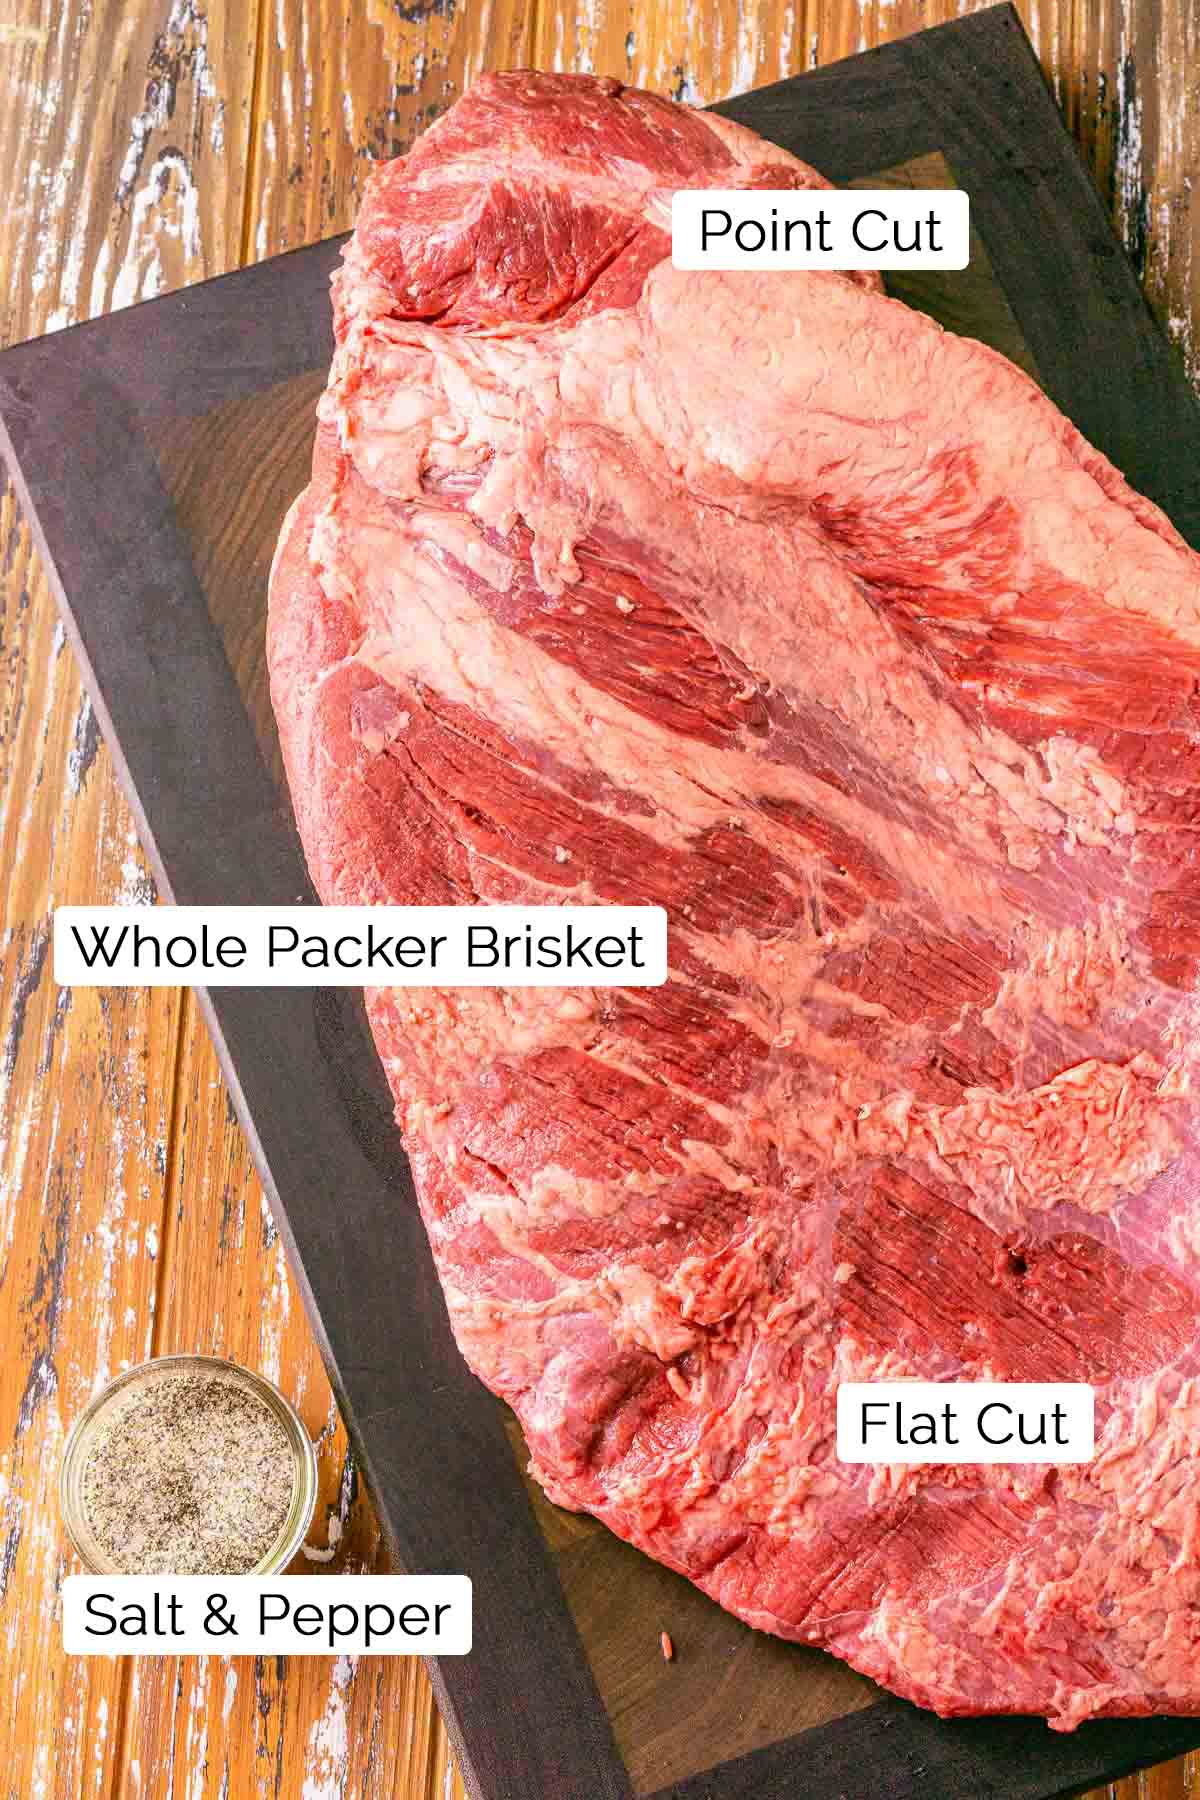 The whole packer brisket on a cutting board with the point and flat cuts labeled.